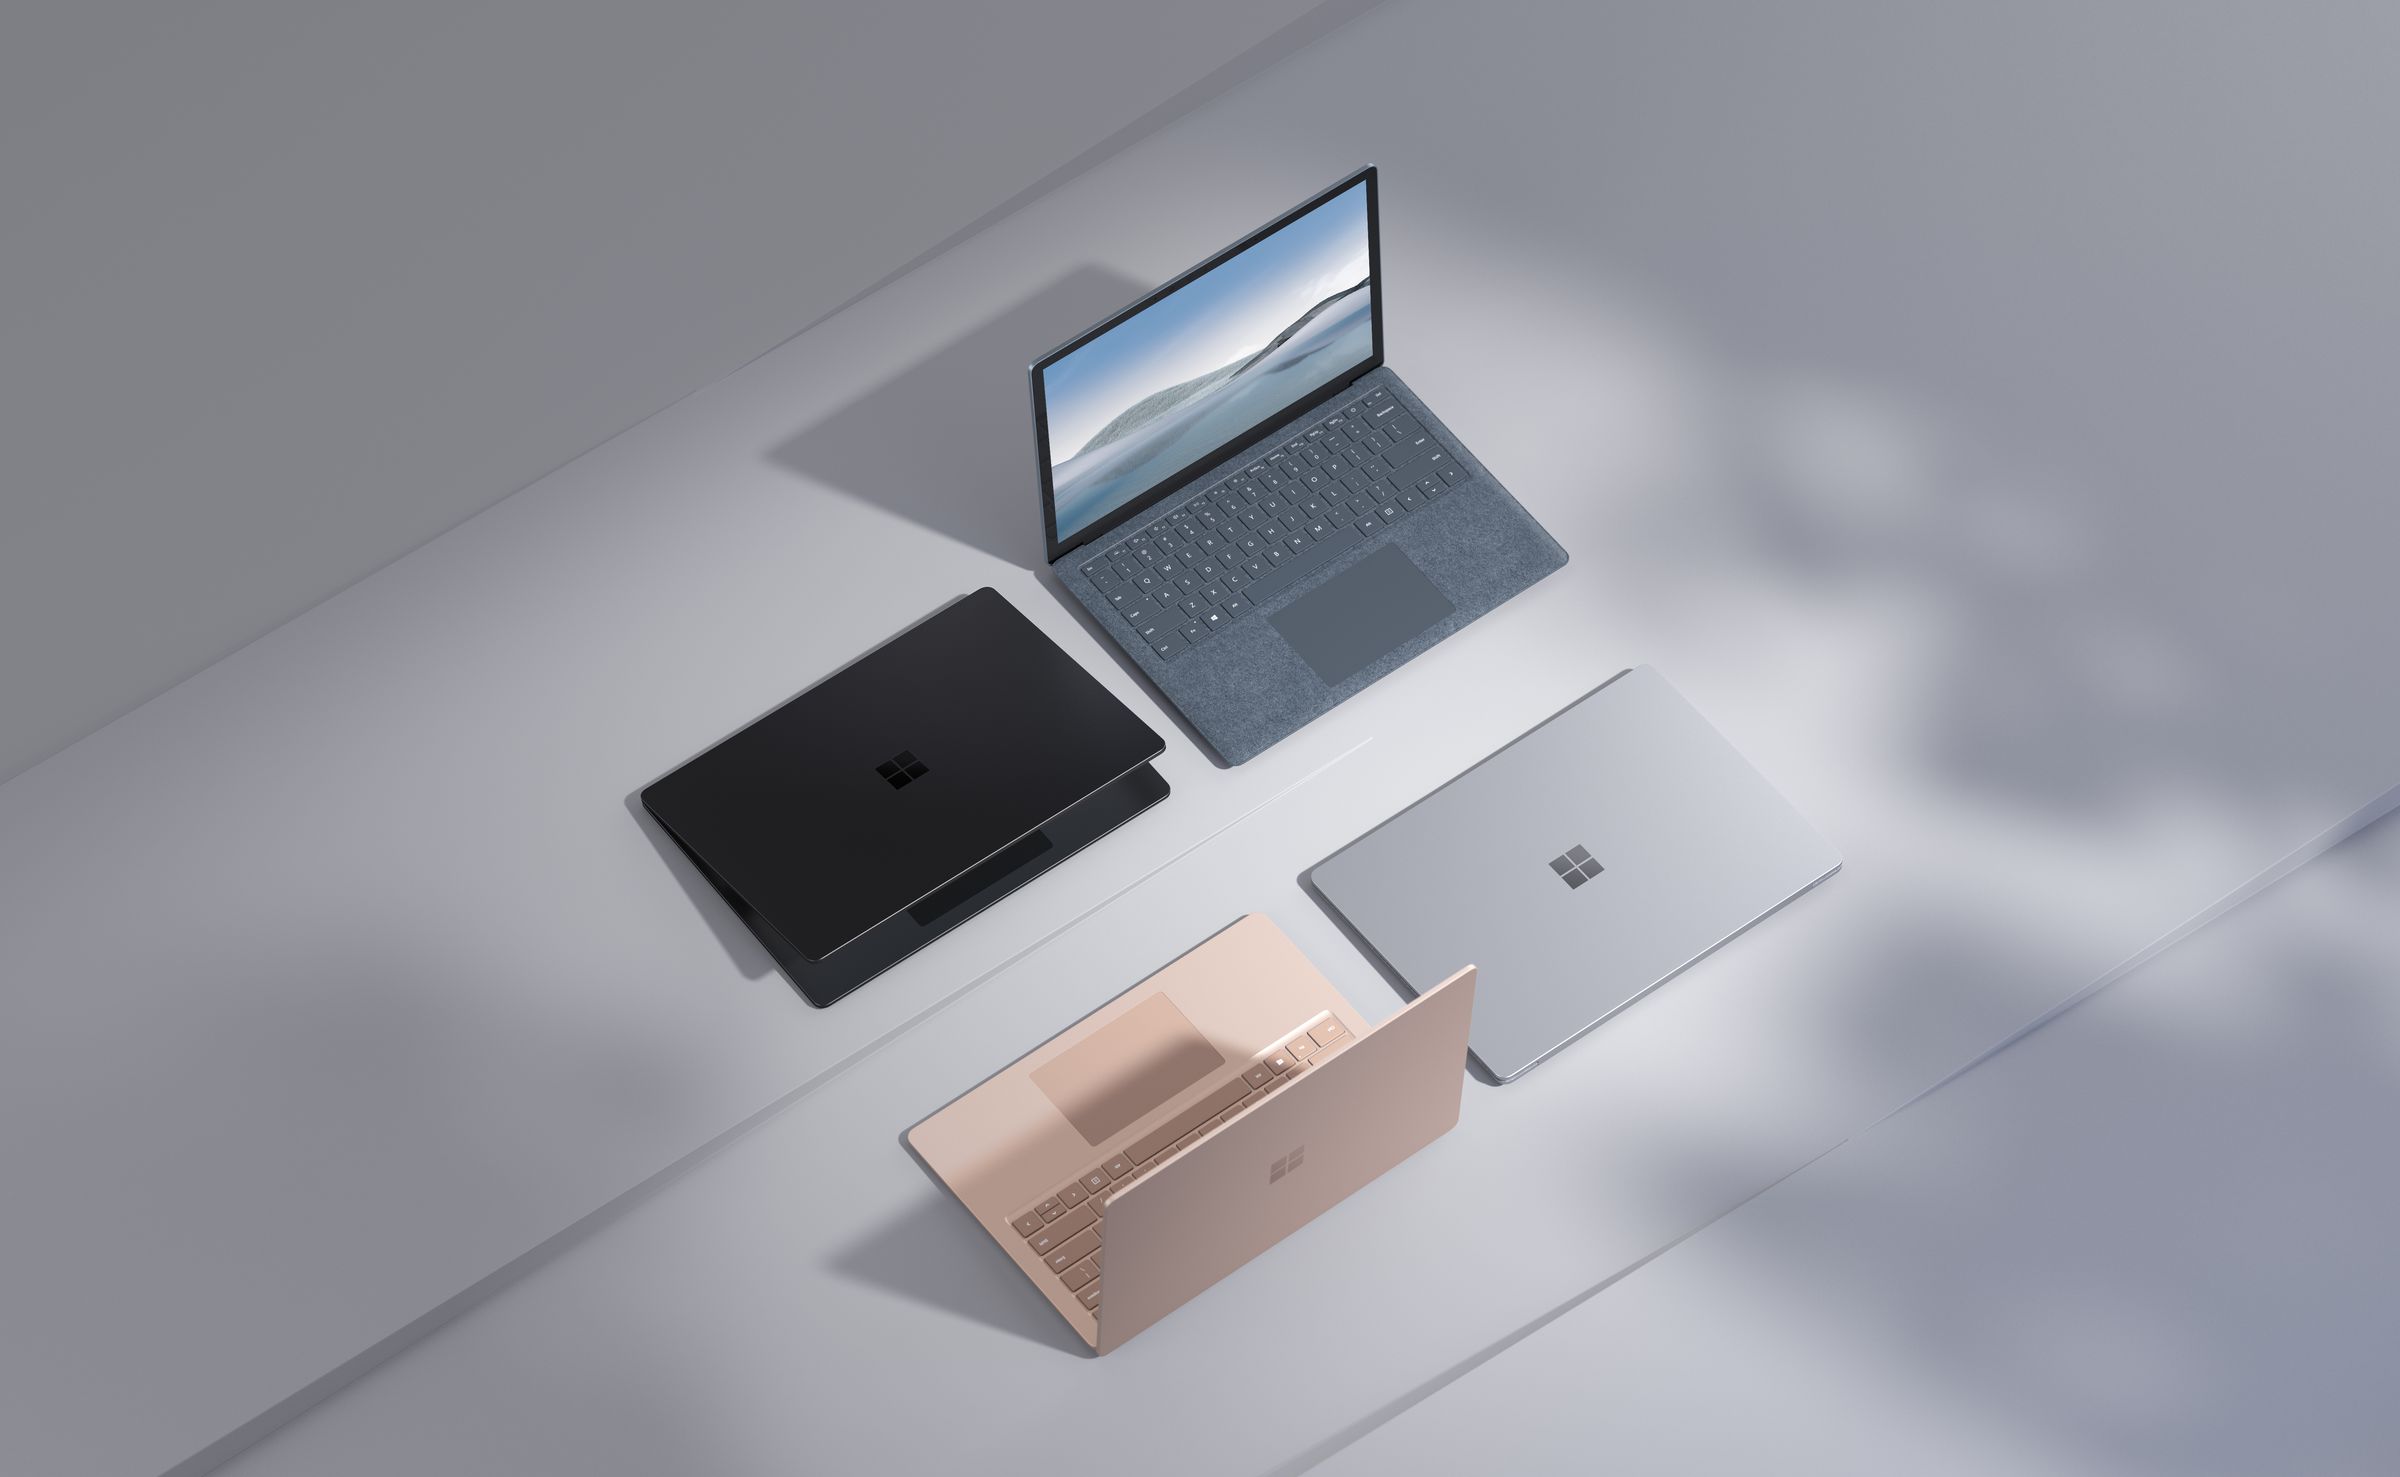 Four Microsoft Surface products in a variety of colors.